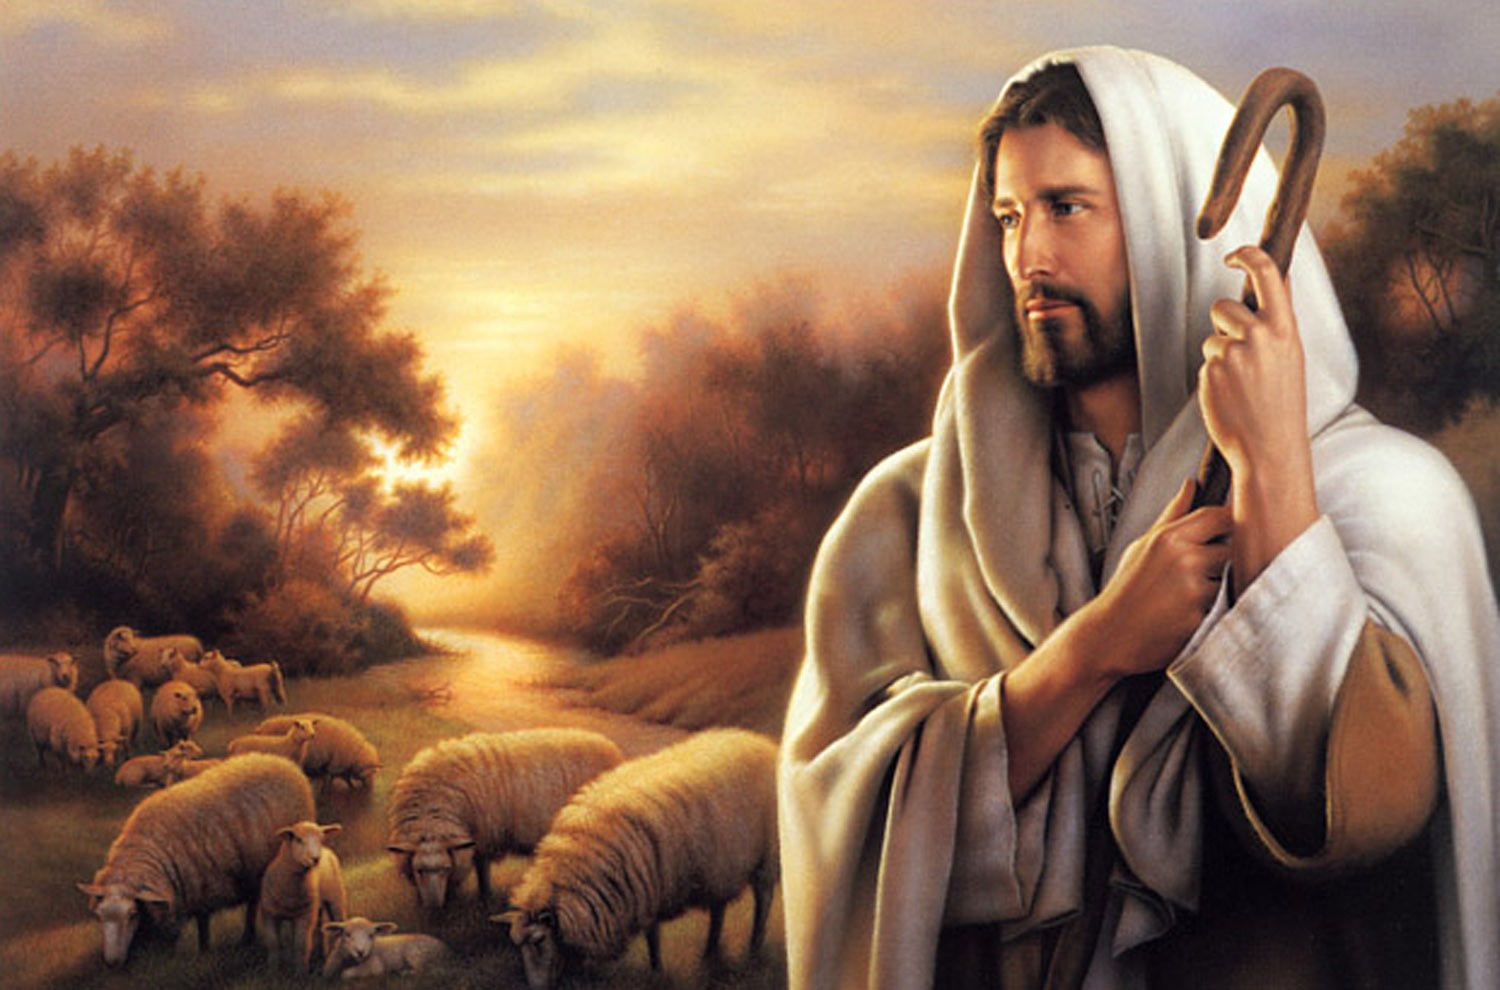 THE LORD IS MY SHEPHERD: A Study of Psalm 23